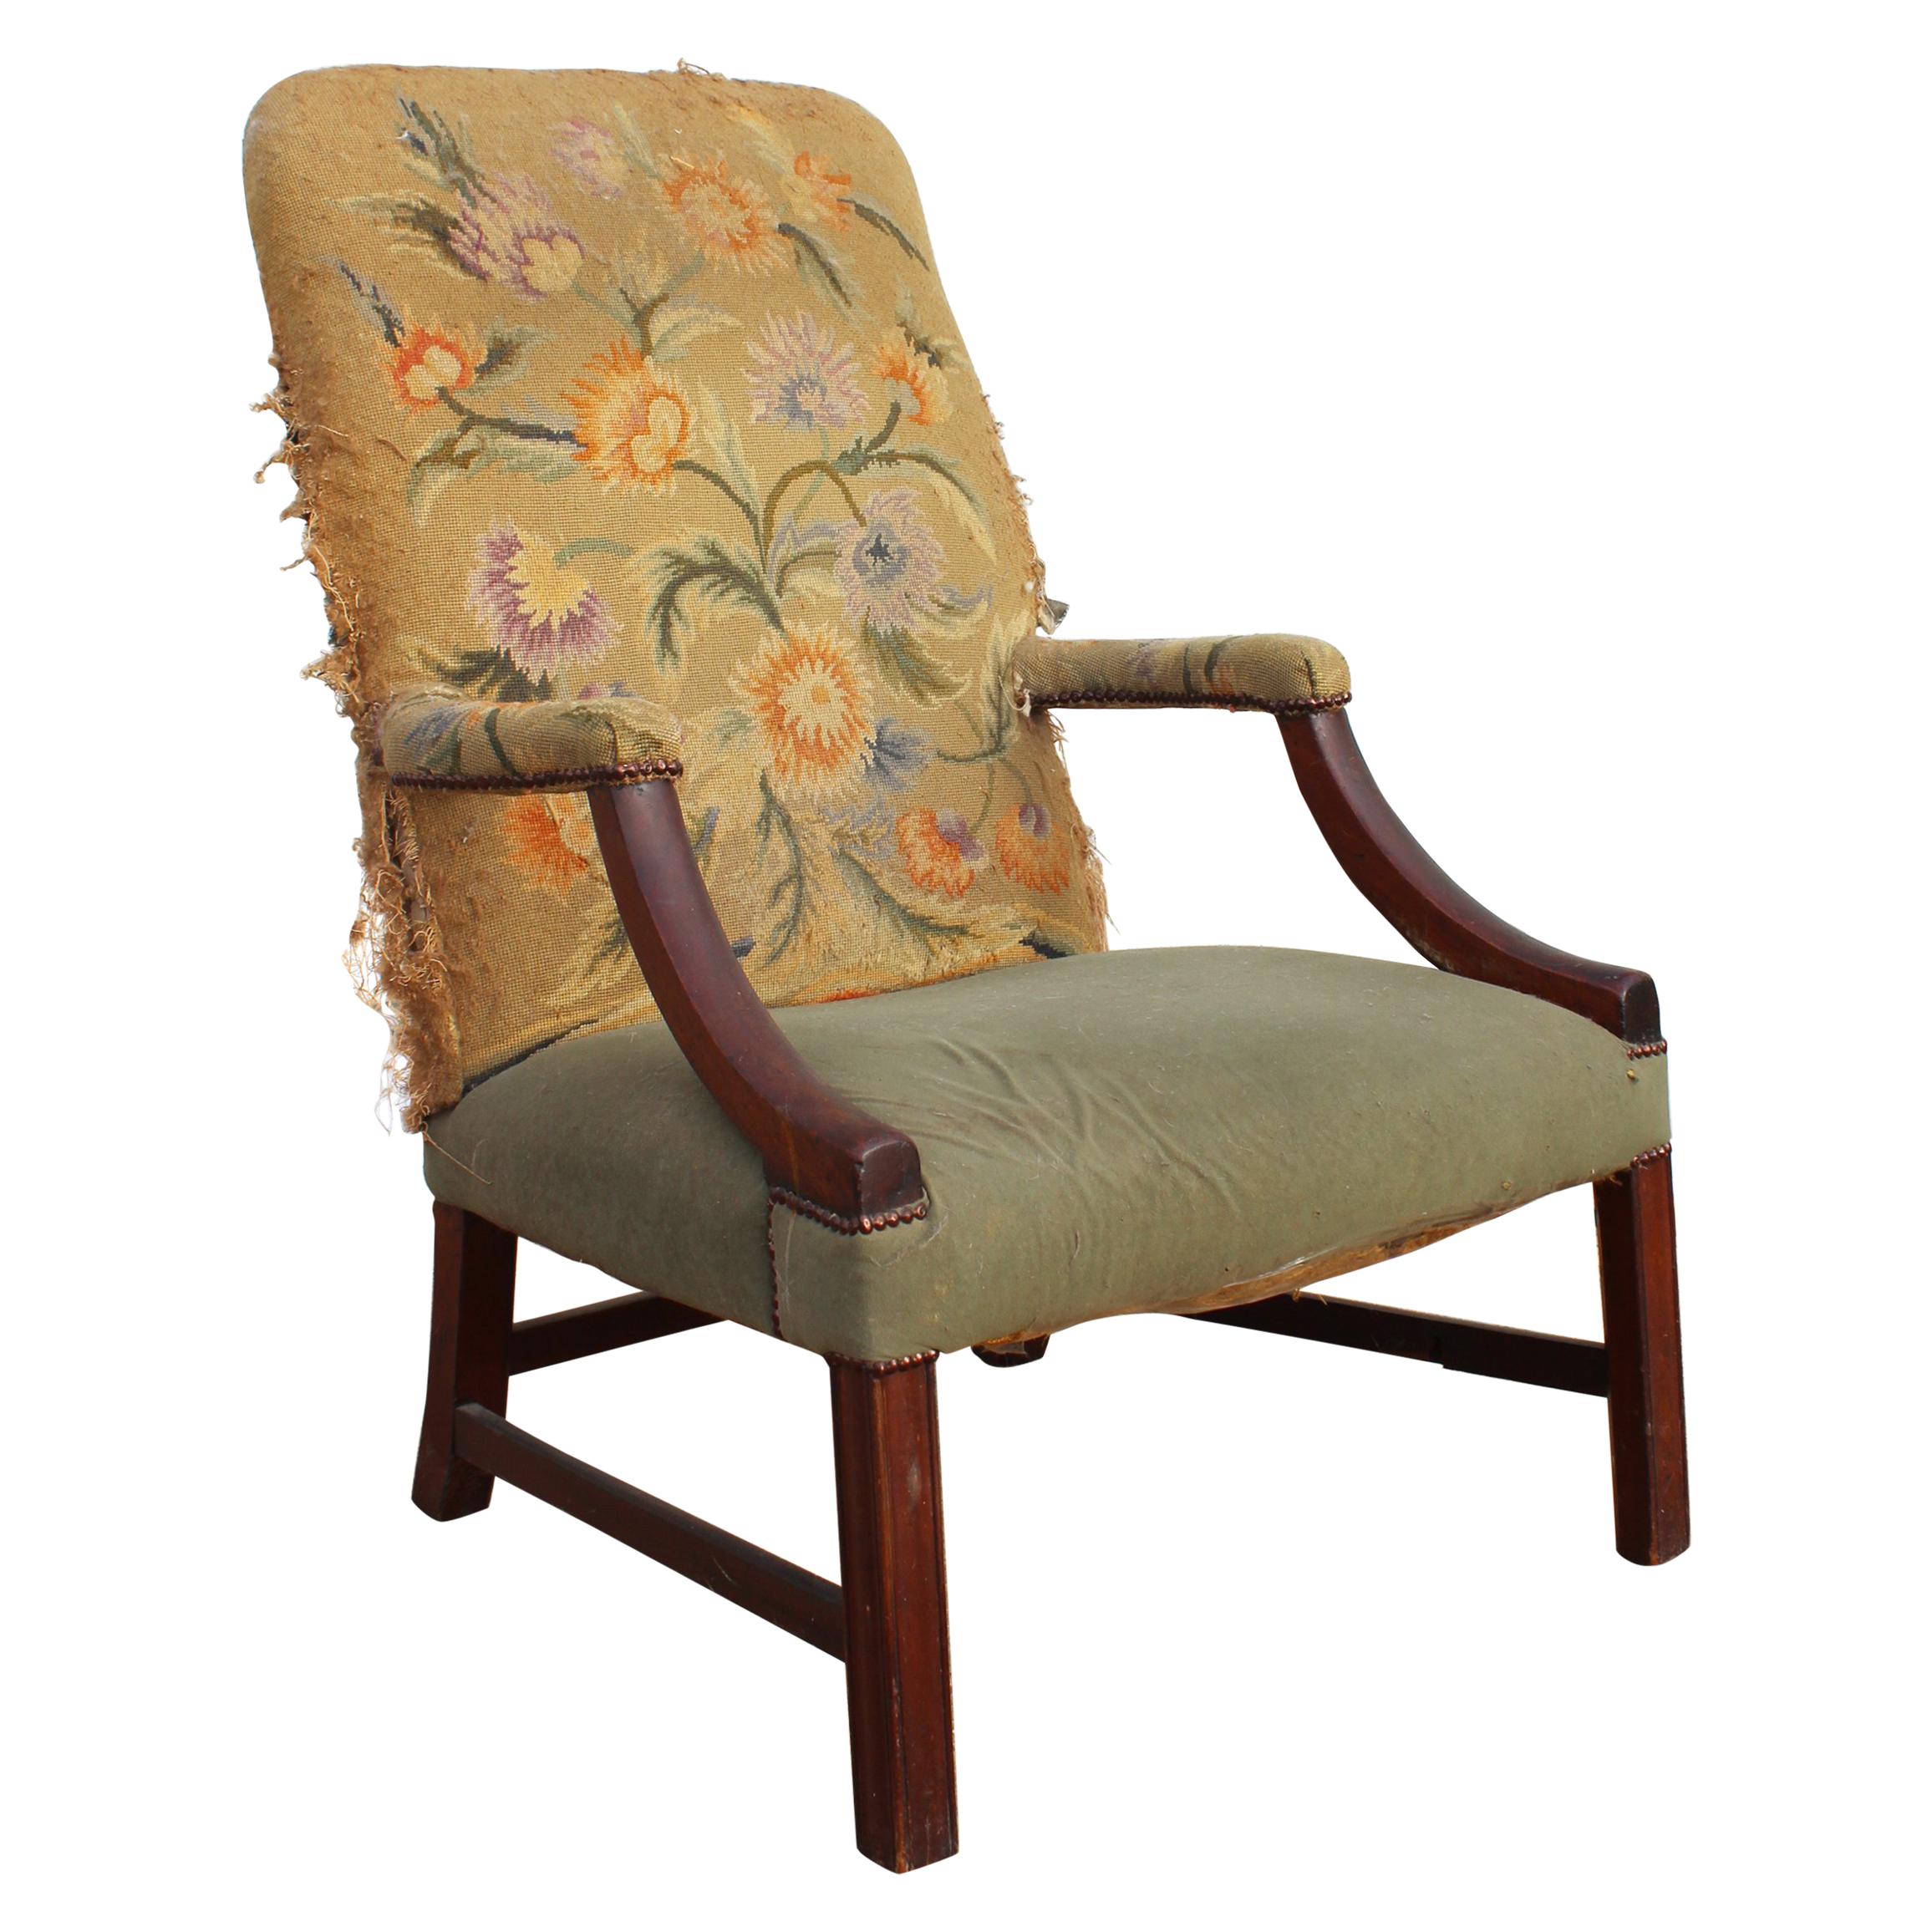 19th Century English Mahogany Armchair with Upholstery That Needs Repair